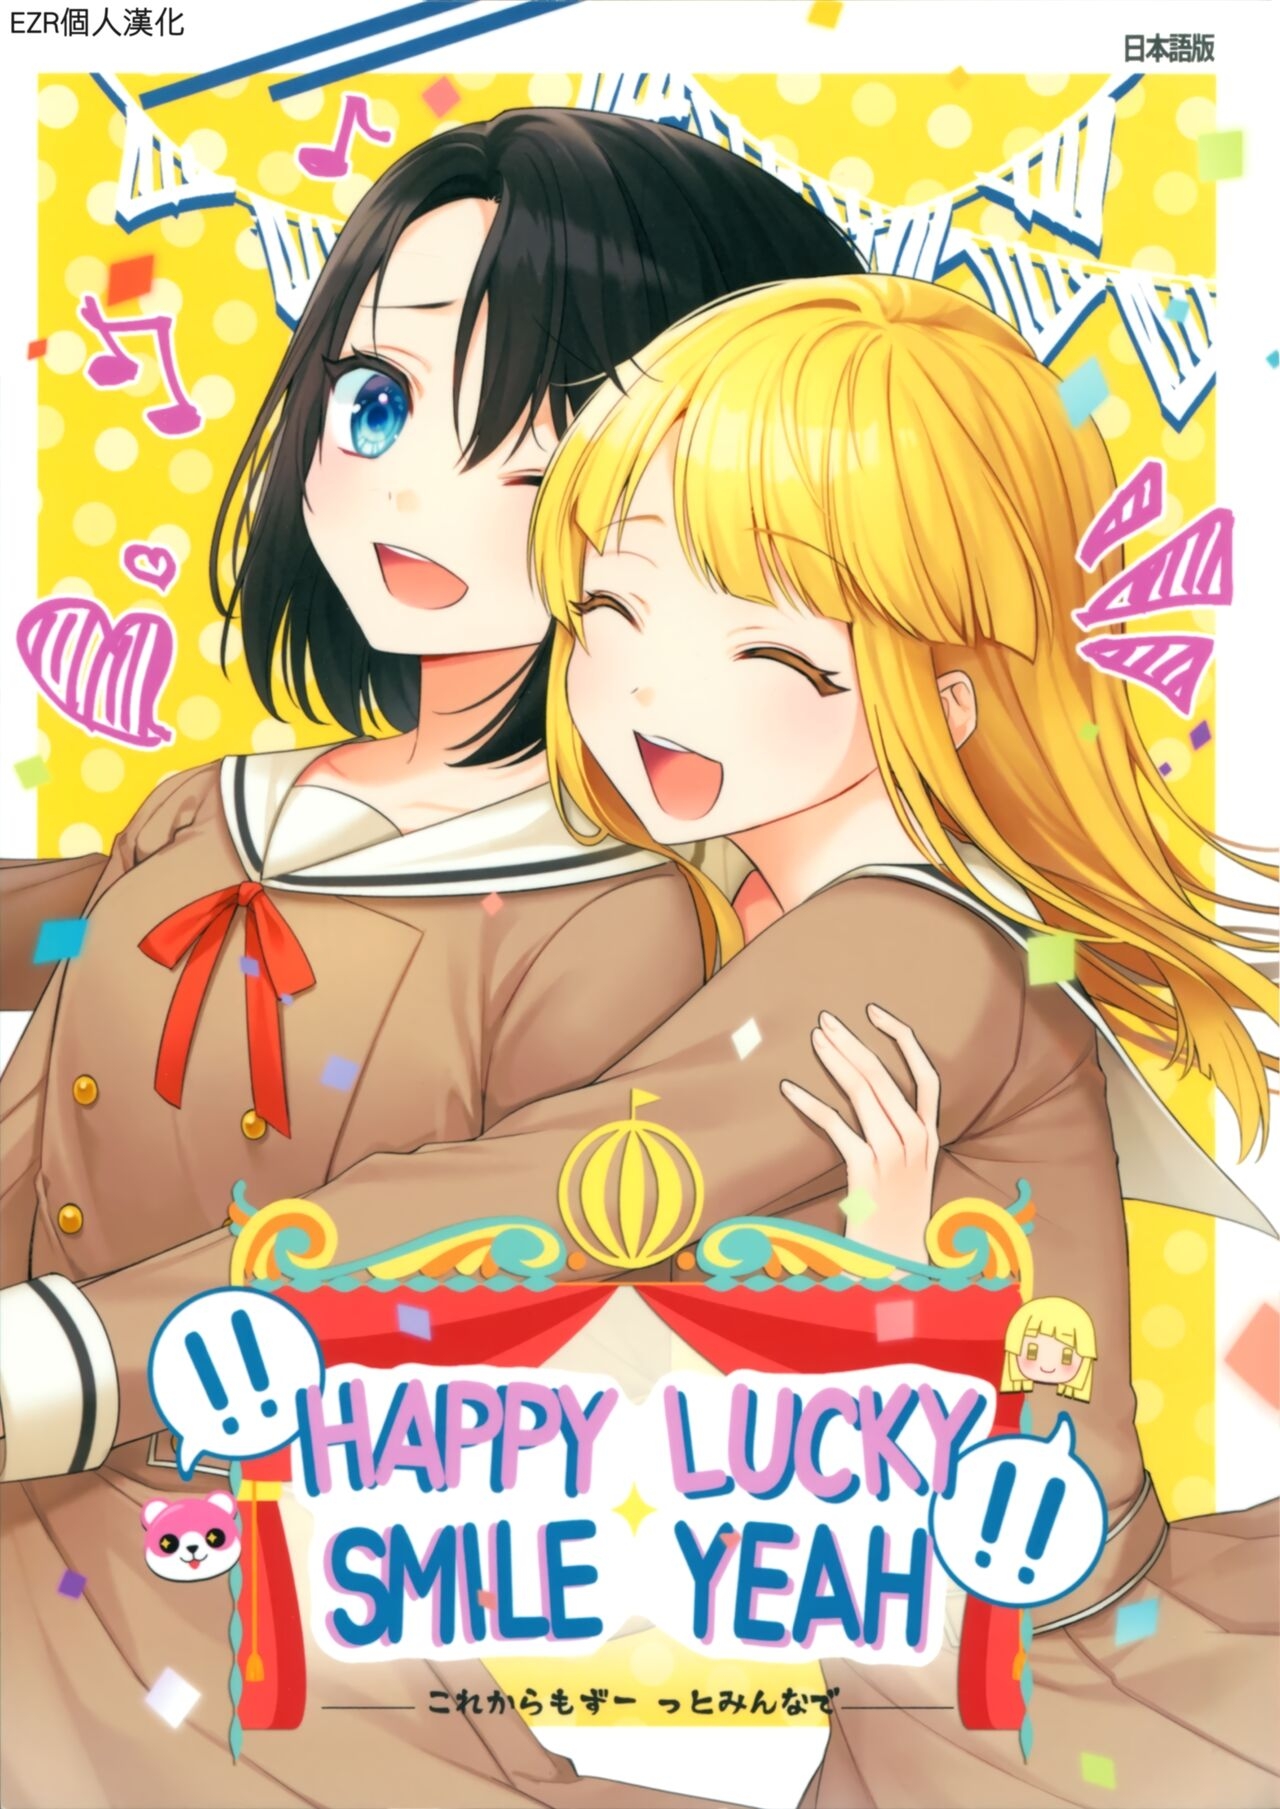 (BanG Dreamer's Party! 9th STAGE) [NiC:ORi (MiNORi)] !!HAPPY LUCKY SMILE YEAH!! (BanG Dream!) [Chinese] [EZR個人漢化] 0